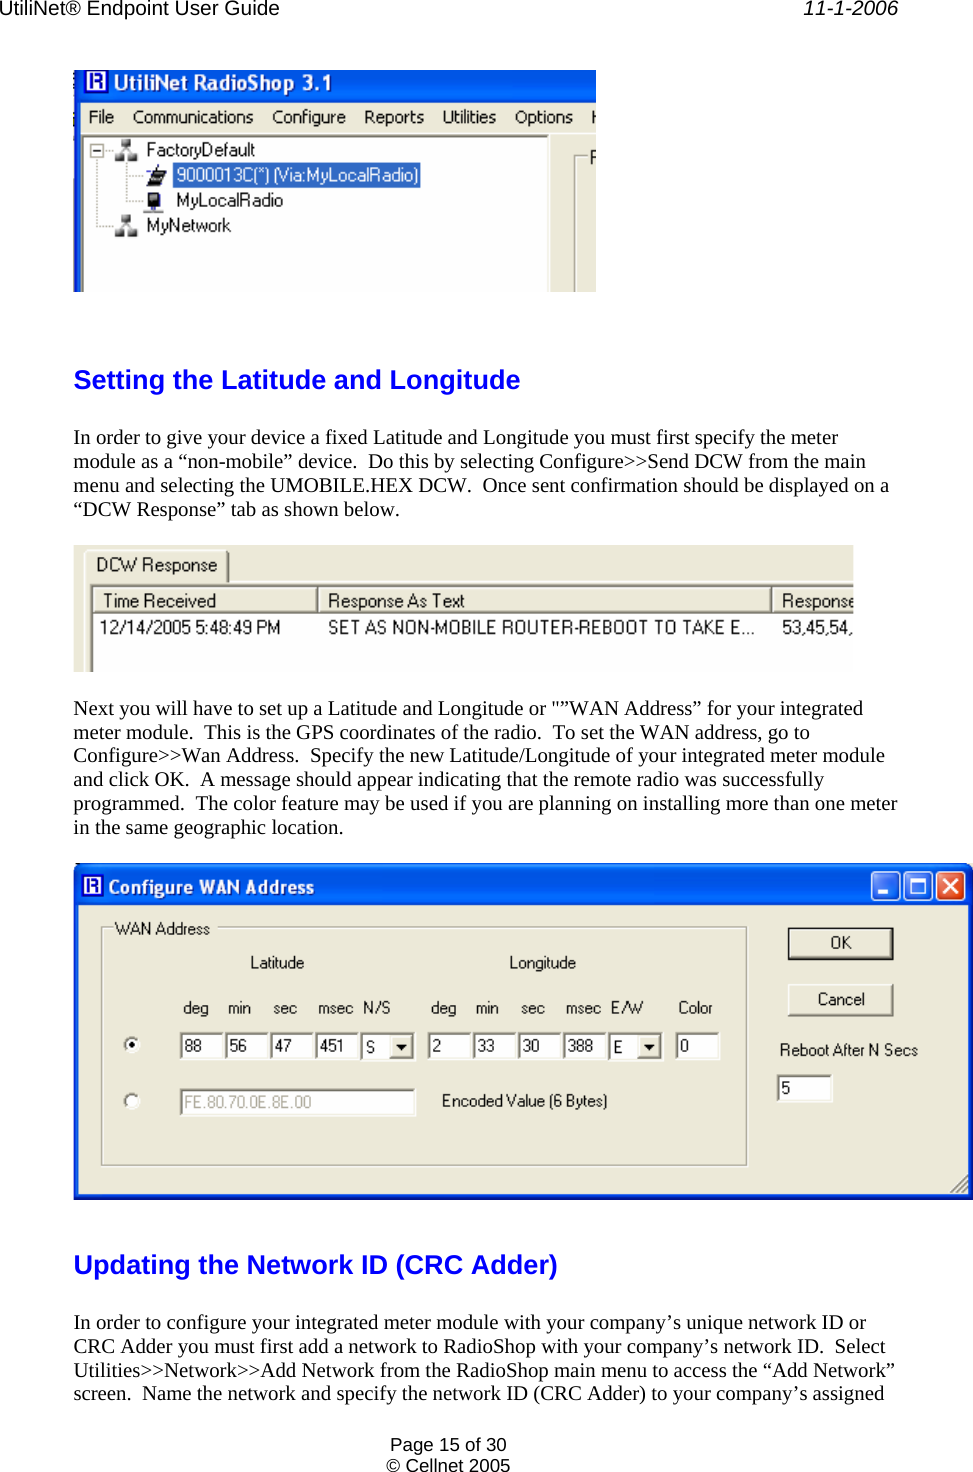 UtiliNet® Endpoint User Guide    11-1-2006 Page 15 of 30 © Cellnet 2005     Setting the Latitude and Longitude  In order to give your device a fixed Latitude and Longitude you must first specify the meter module as a “non-mobile” device.  Do this by selecting Configure&gt;&gt;Send DCW from the main menu and selecting the UMOBILE.HEX DCW.  Once sent confirmation should be displayed on a “DCW Response” tab as shown below.      Next you will have to set up a Latitude and Longitude or &quot;”WAN Address” for your integrated meter module.  This is the GPS coordinates of the radio.  To set the WAN address, go to Configure&gt;&gt;Wan Address.  Specify the new Latitude/Longitude of your integrated meter module and click OK.  A message should appear indicating that the remote radio was successfully programmed.  The color feature may be used if you are planning on installing more than one meter in the same geographic location.    Updating the Network ID (CRC Adder)  In order to configure your integrated meter module with your company’s unique network ID or CRC Adder you must first add a network to RadioShop with your company’s network ID.  Select Utilities&gt;&gt;Network&gt;&gt;Add Network from the RadioShop main menu to access the “Add Network” screen.  Name the network and specify the network ID (CRC Adder) to your company’s assigned 